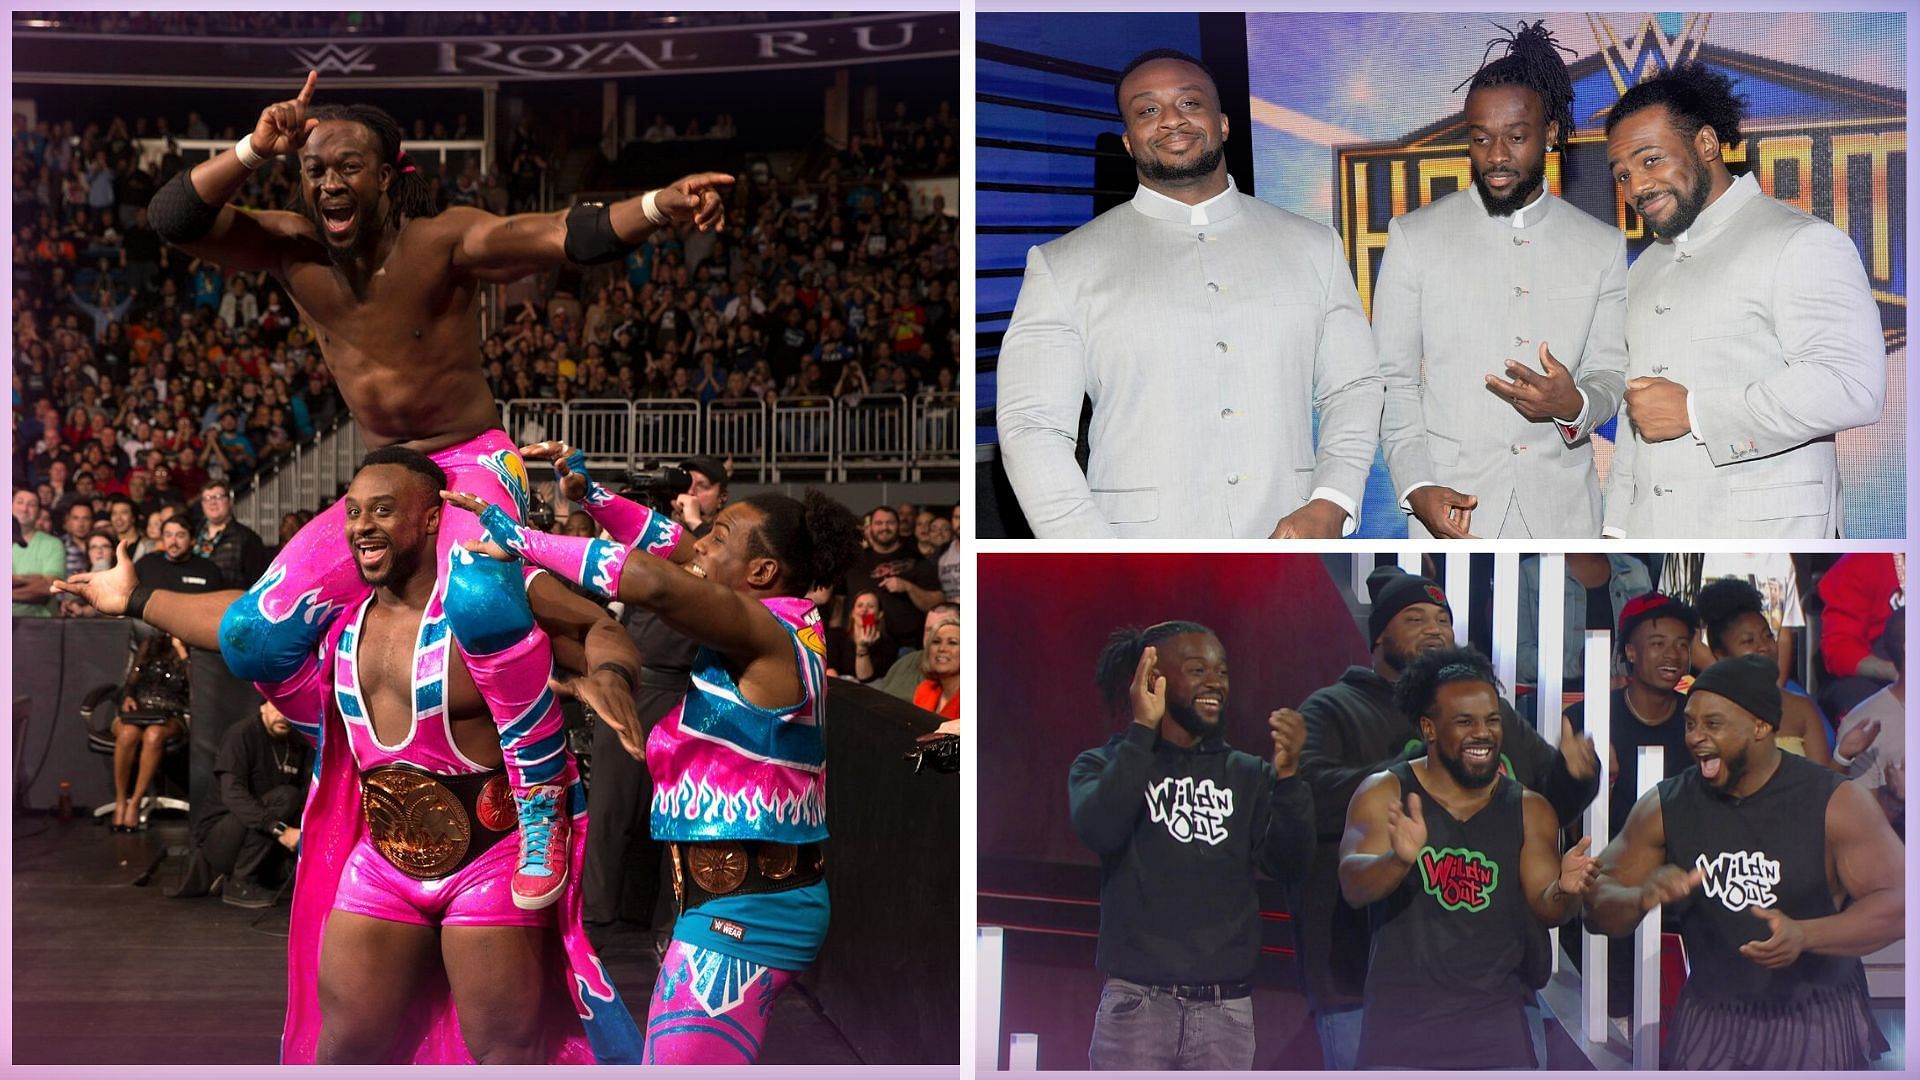 The New Day are the current WWE NXT Tag Team Champions.